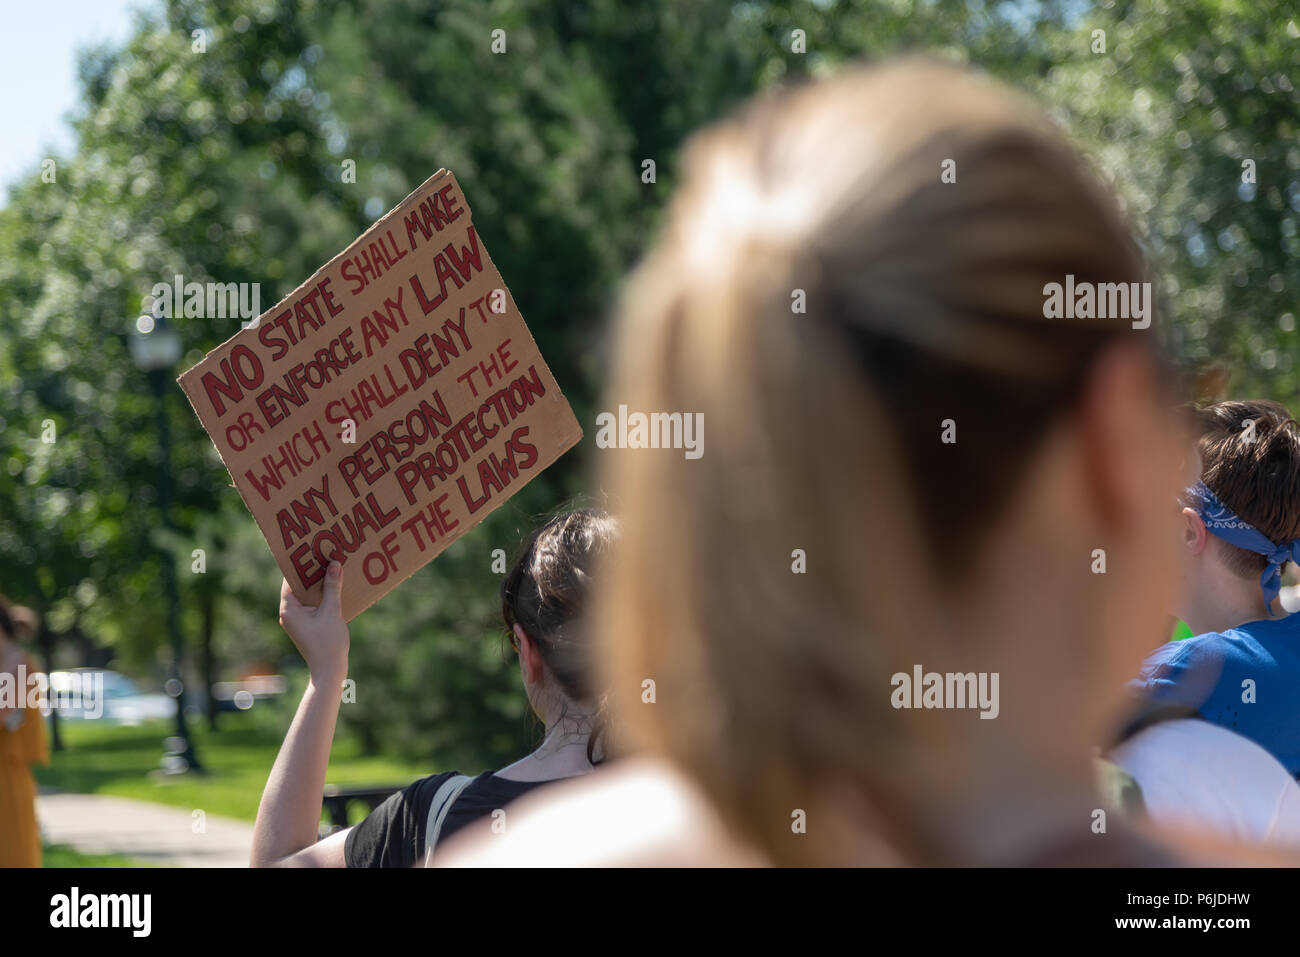 Iowa City, Iowa. 30th June 2018. Protest against ICE Family Separation policy of the government. People gathered at a downtown city park after a march that started from the Old Capitol Building. Madhu V. Singh/Alamy Live News Stock Photo